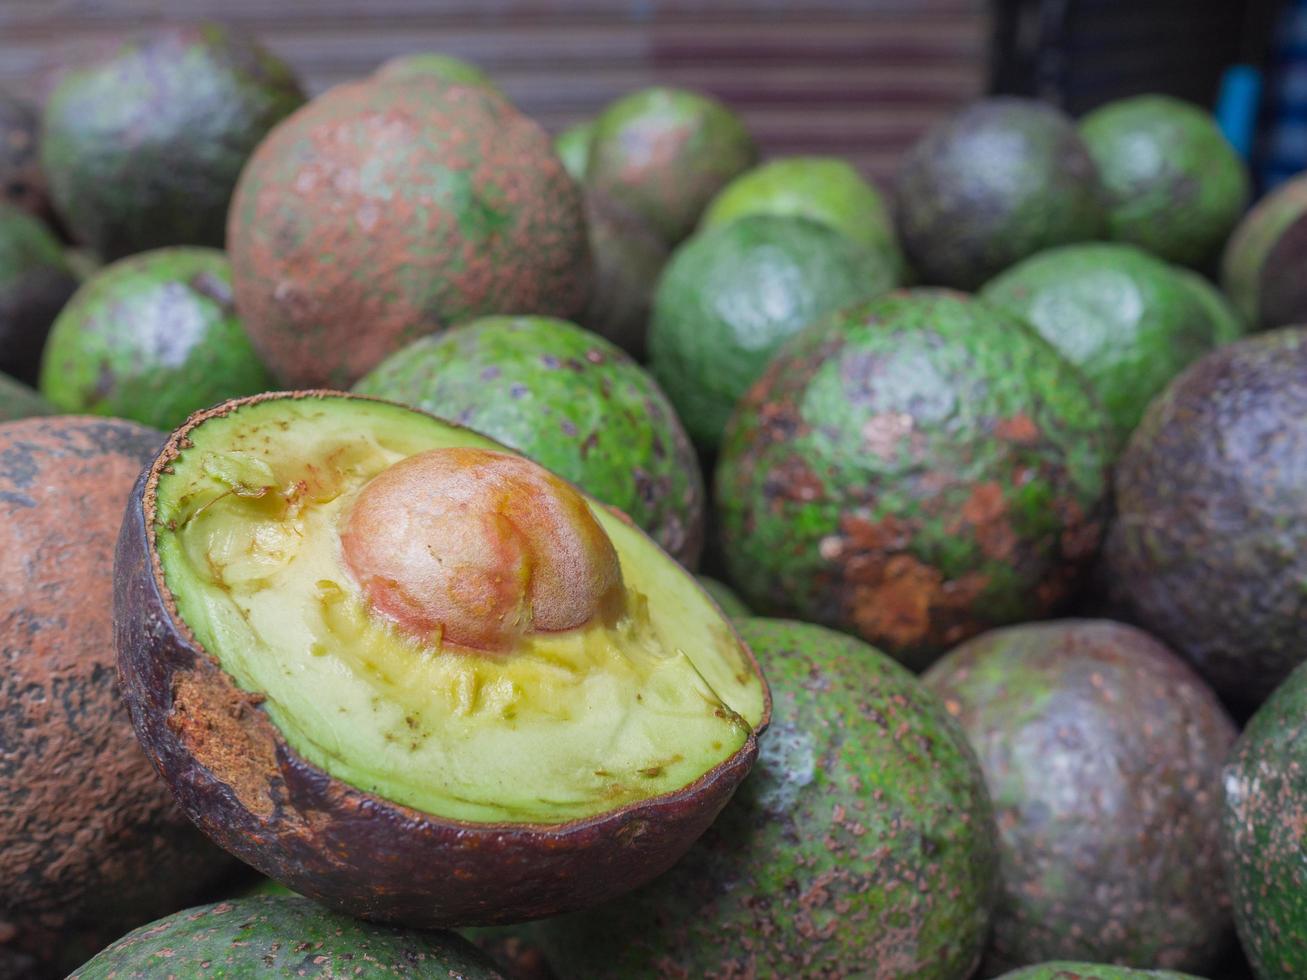 Pile of avocados for sale in the market photo